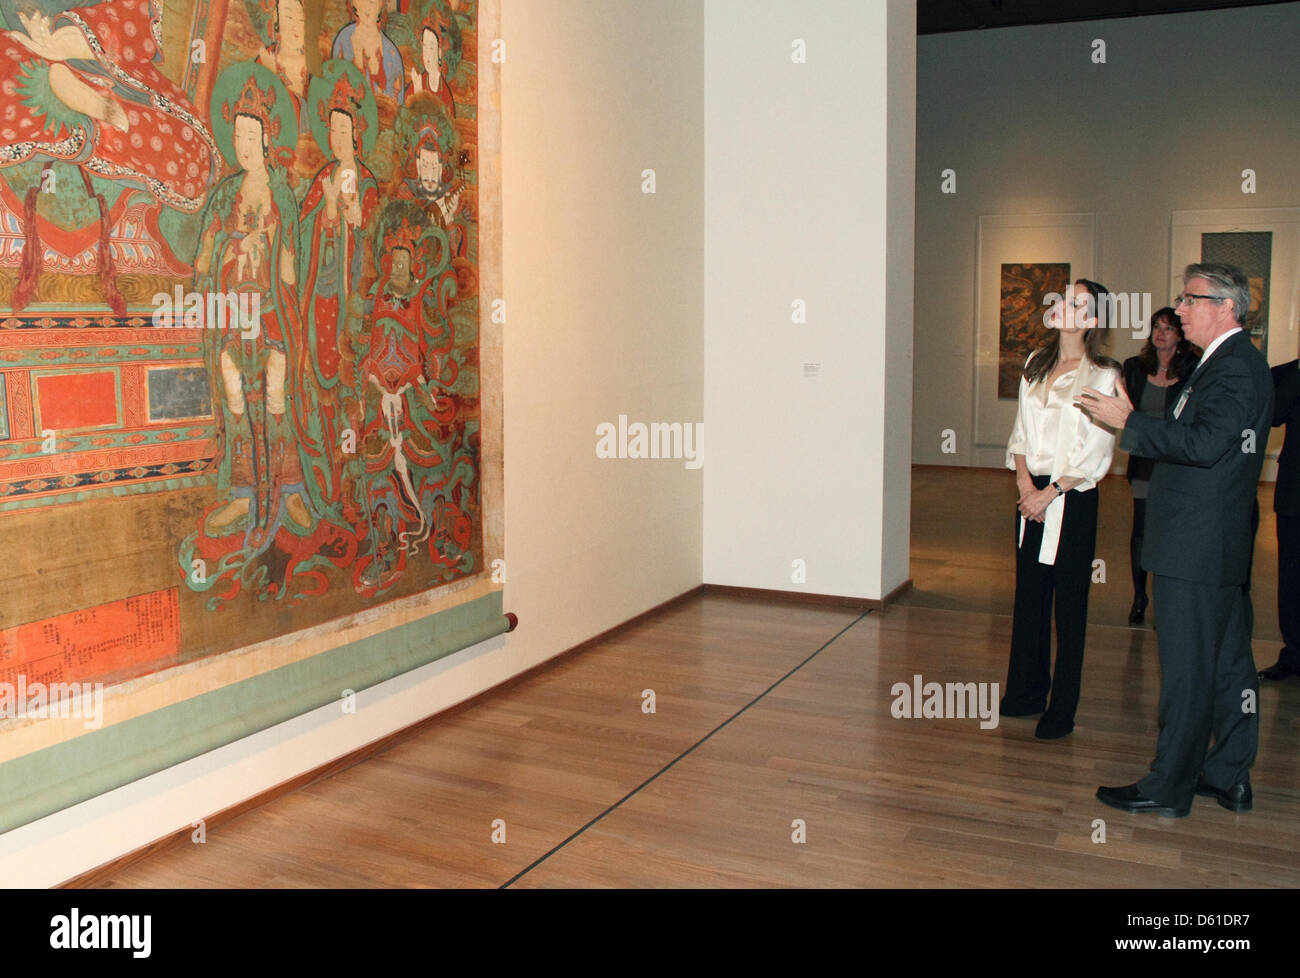 (HANDOUT) A handout dated 11 April 2012 shows American actors Angelina Jolie and Stephen Little, curator and director of Chinese and Korean art, looking at a piece from the collection of 'Chinese Art' at the Los Angeles County Museum of Art (LACMA) with their son Pax in Los Angeles, USA, 11 April 2012. Jolie is wearing the new engagement ring on her left ring finger which was made  Stock Photo